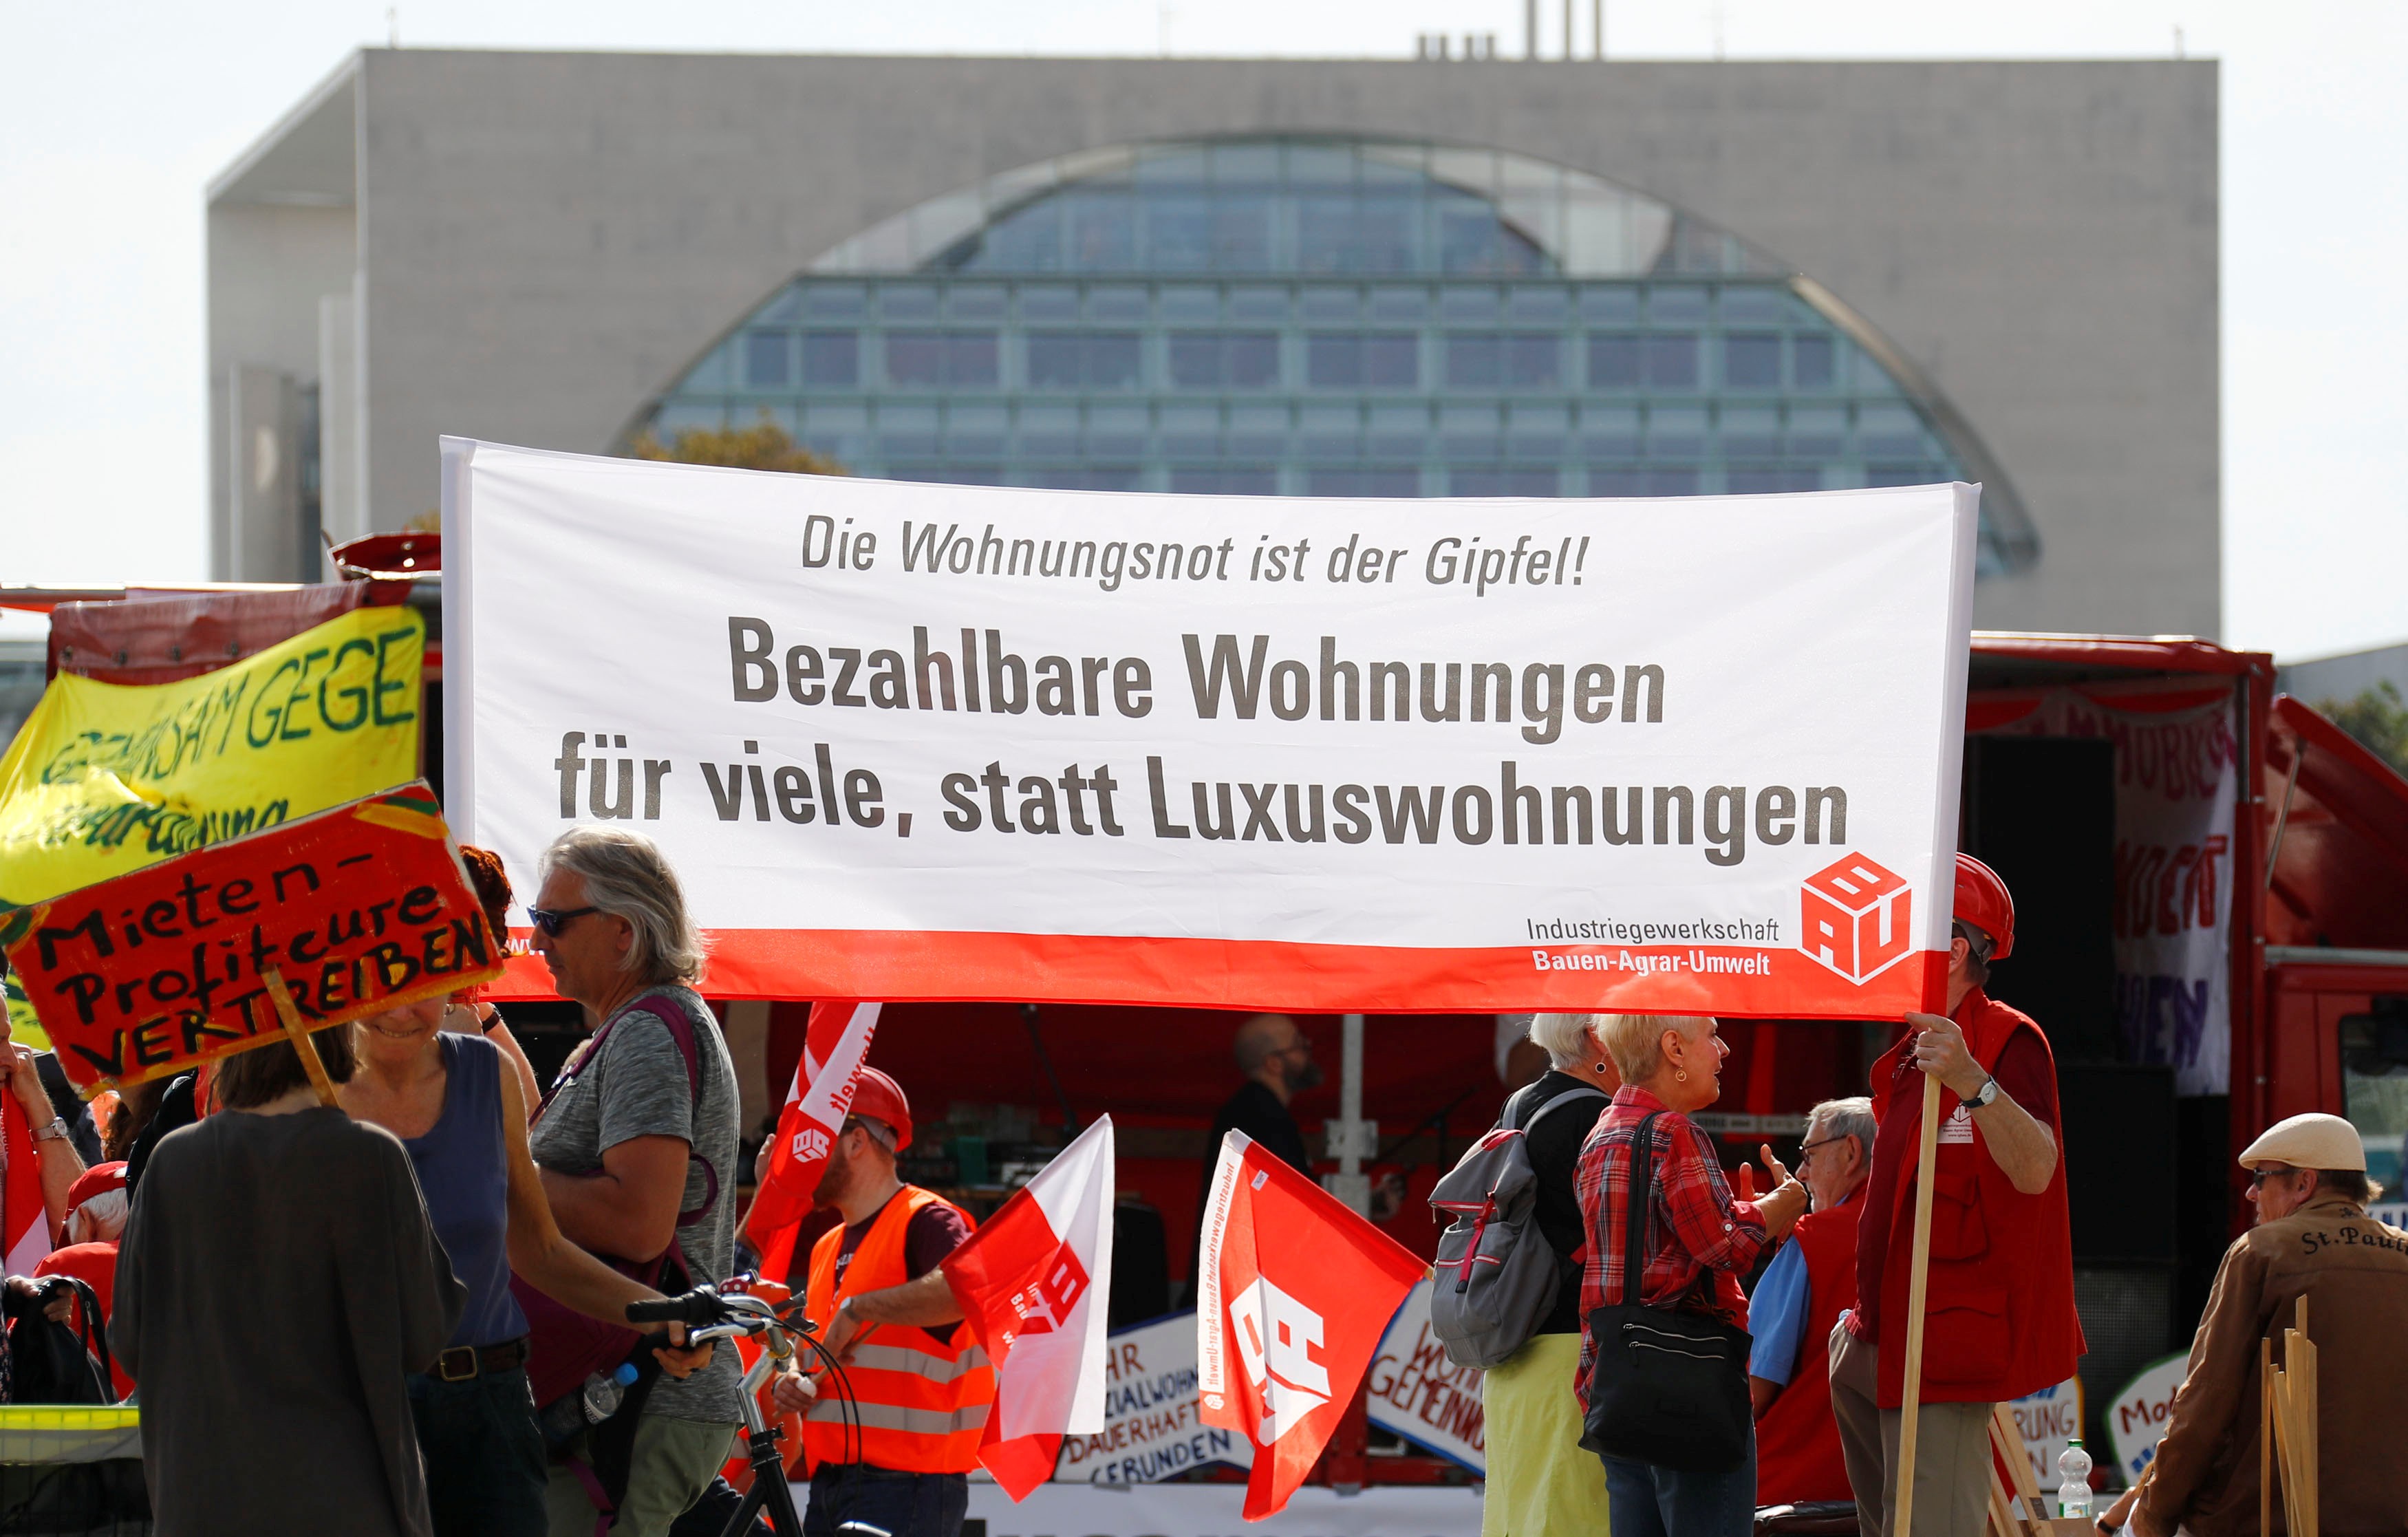 Demonstrators protest against last Friday’s housing summit on rising rents and a shortage of affordable housing in front of the Chancellery in Berlin. Photo: Reuters